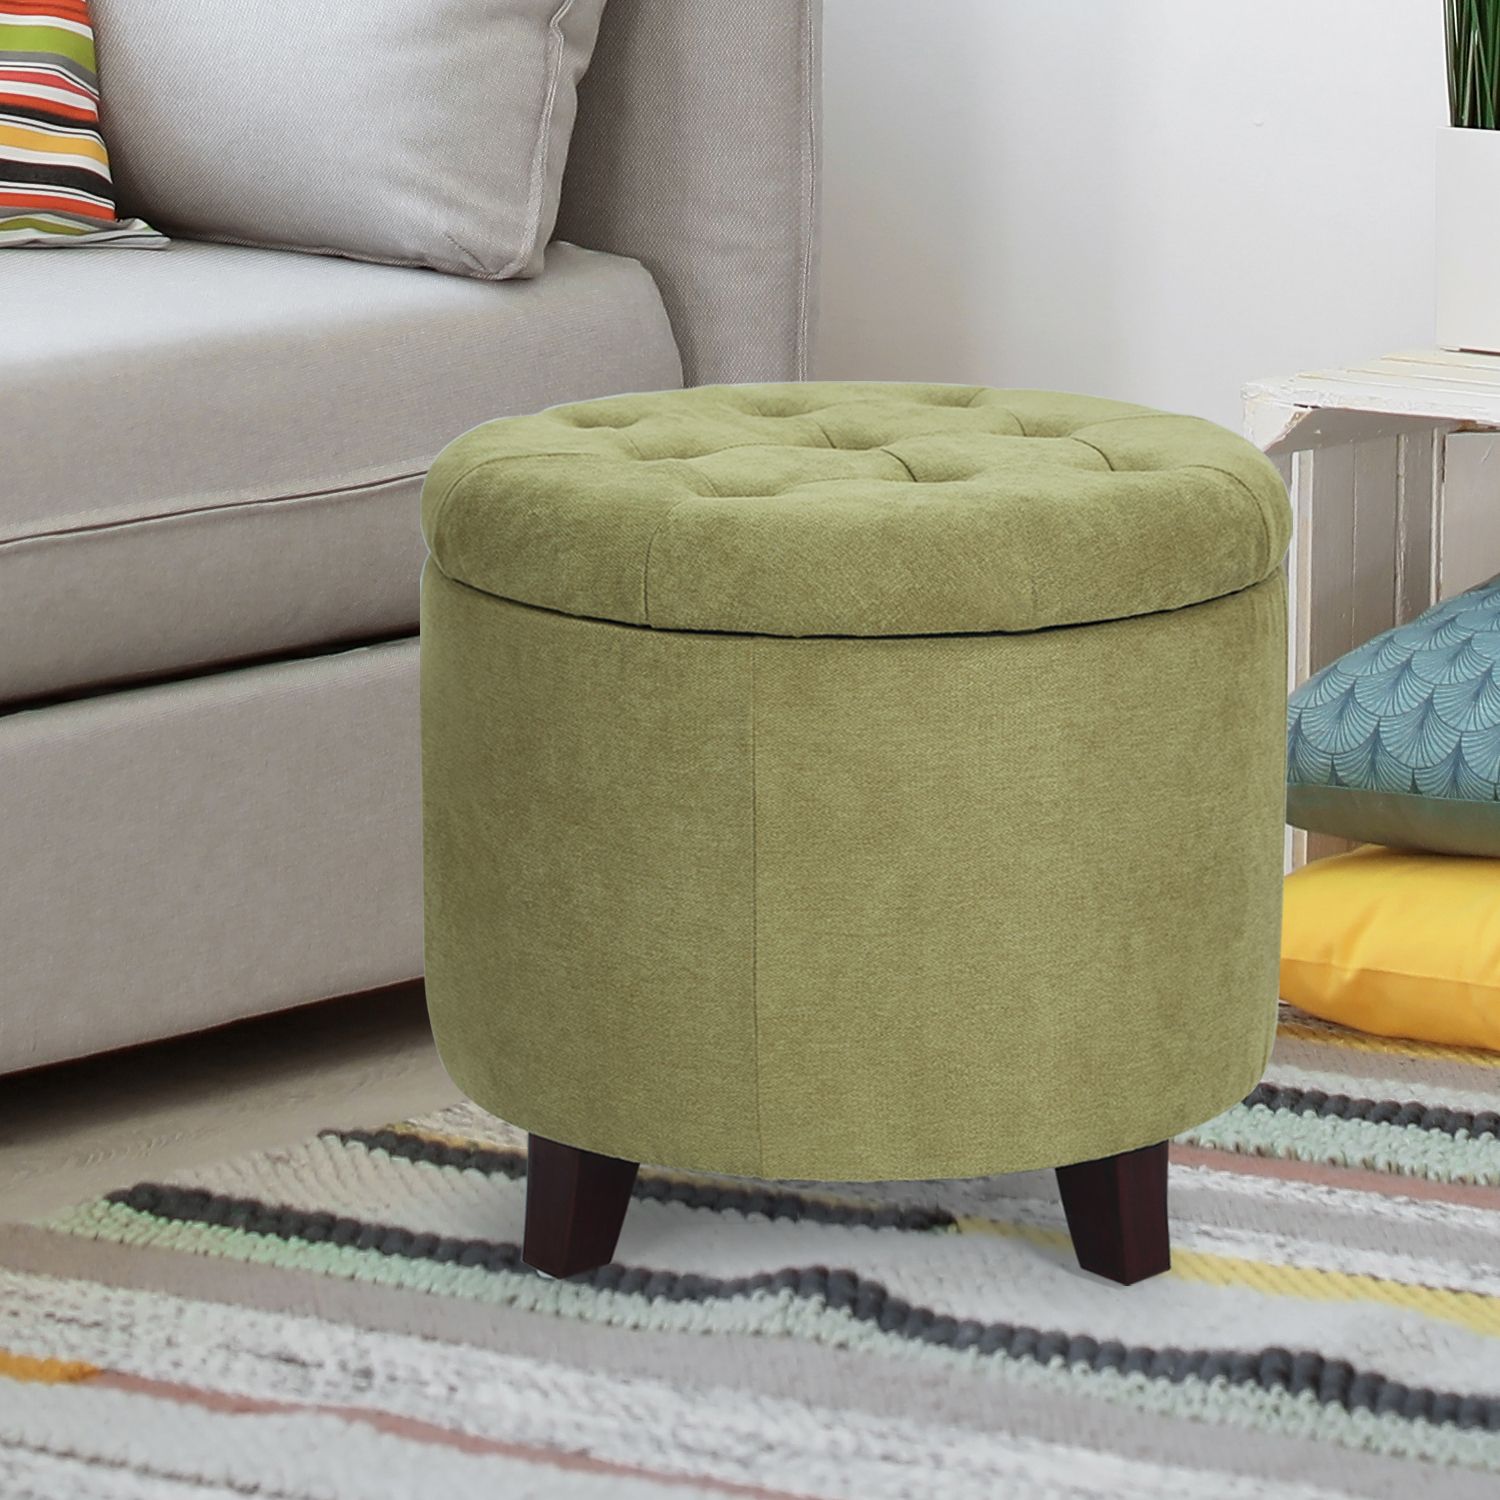 Joveco Fabric Cushion Round Button Tufted Lift Top Storage Ottoman Pertaining To Light Gray Fabric Tufted Round Storage Ottomans (View 2 of 20)